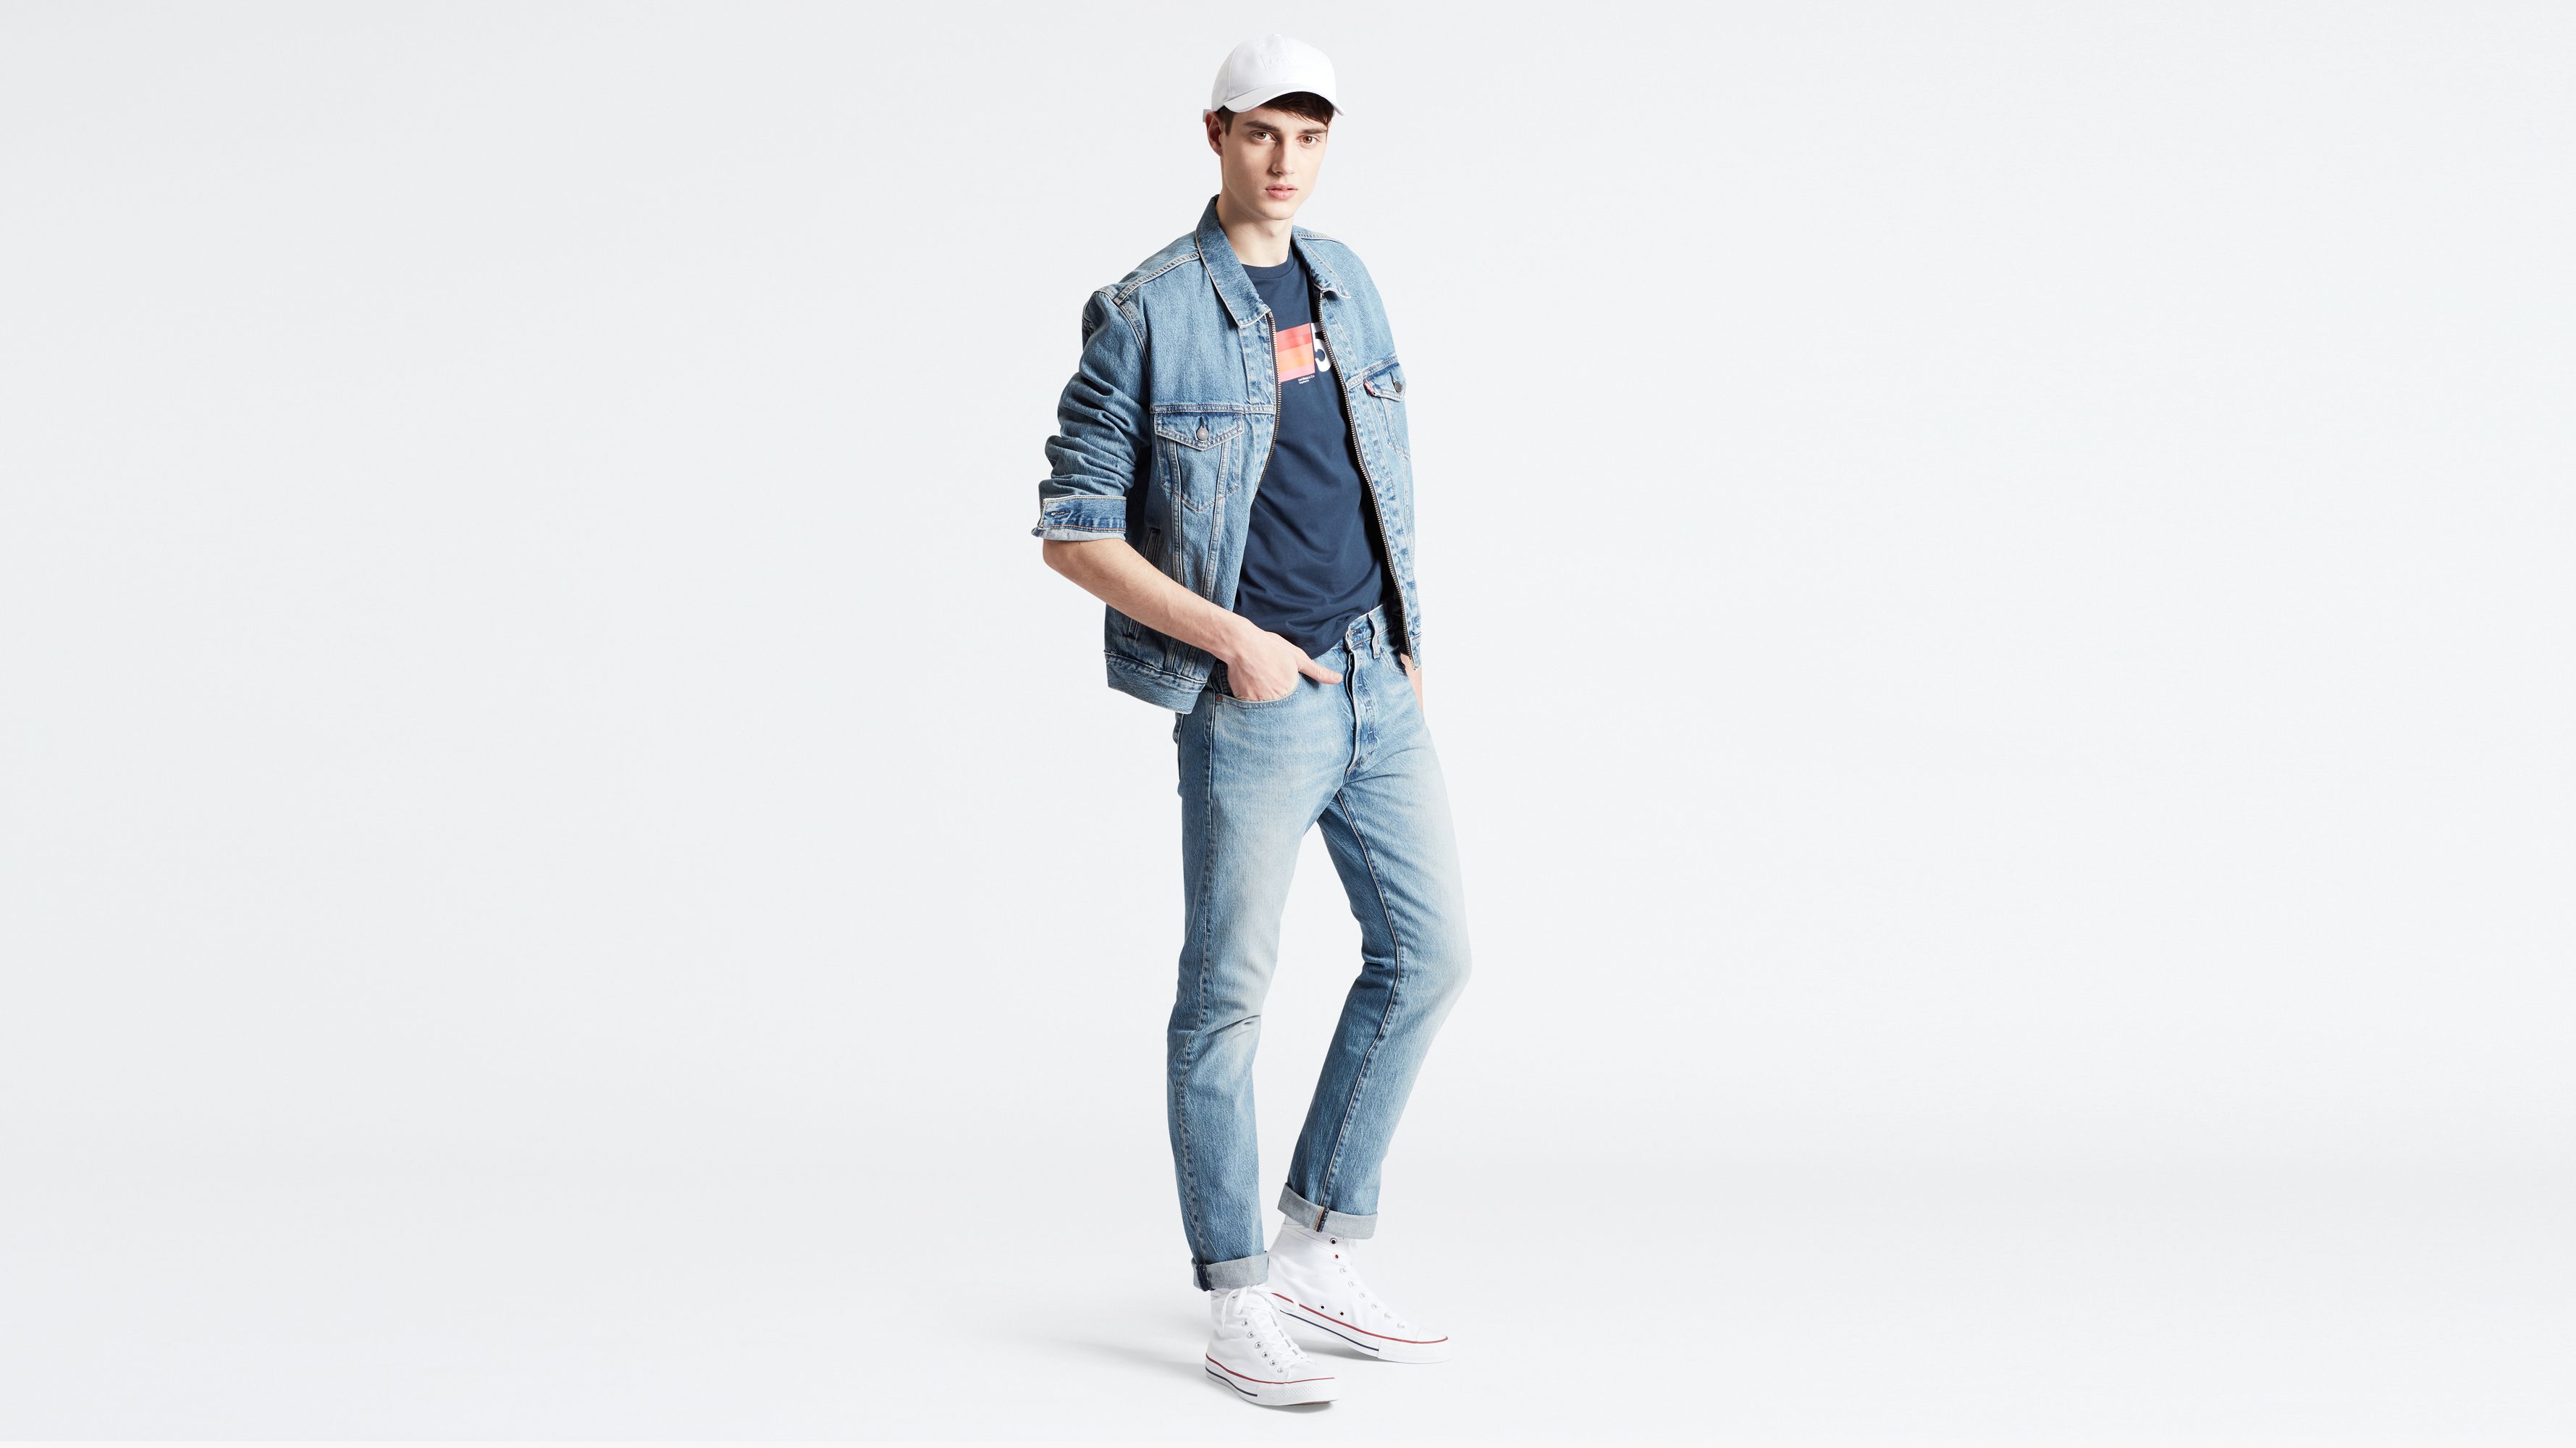 levis cz Online shopping has never been 